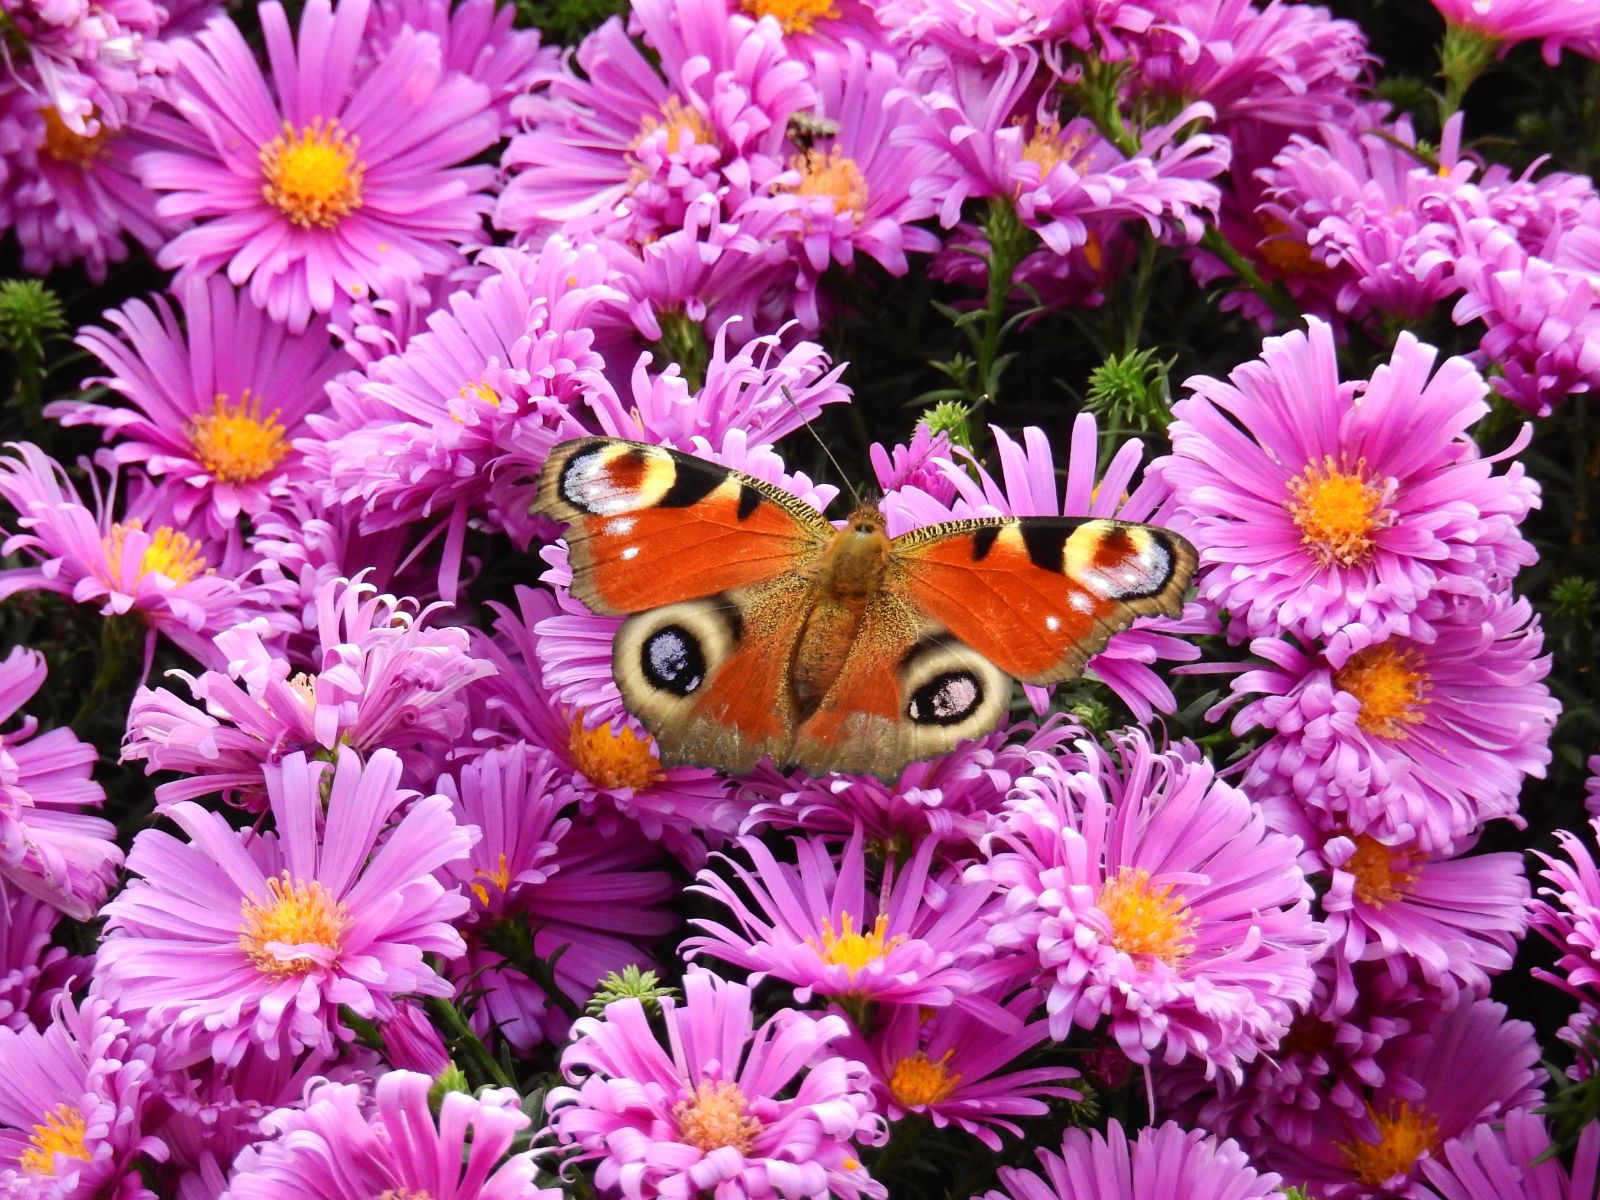 A peacock butterfly on bright pink flowers